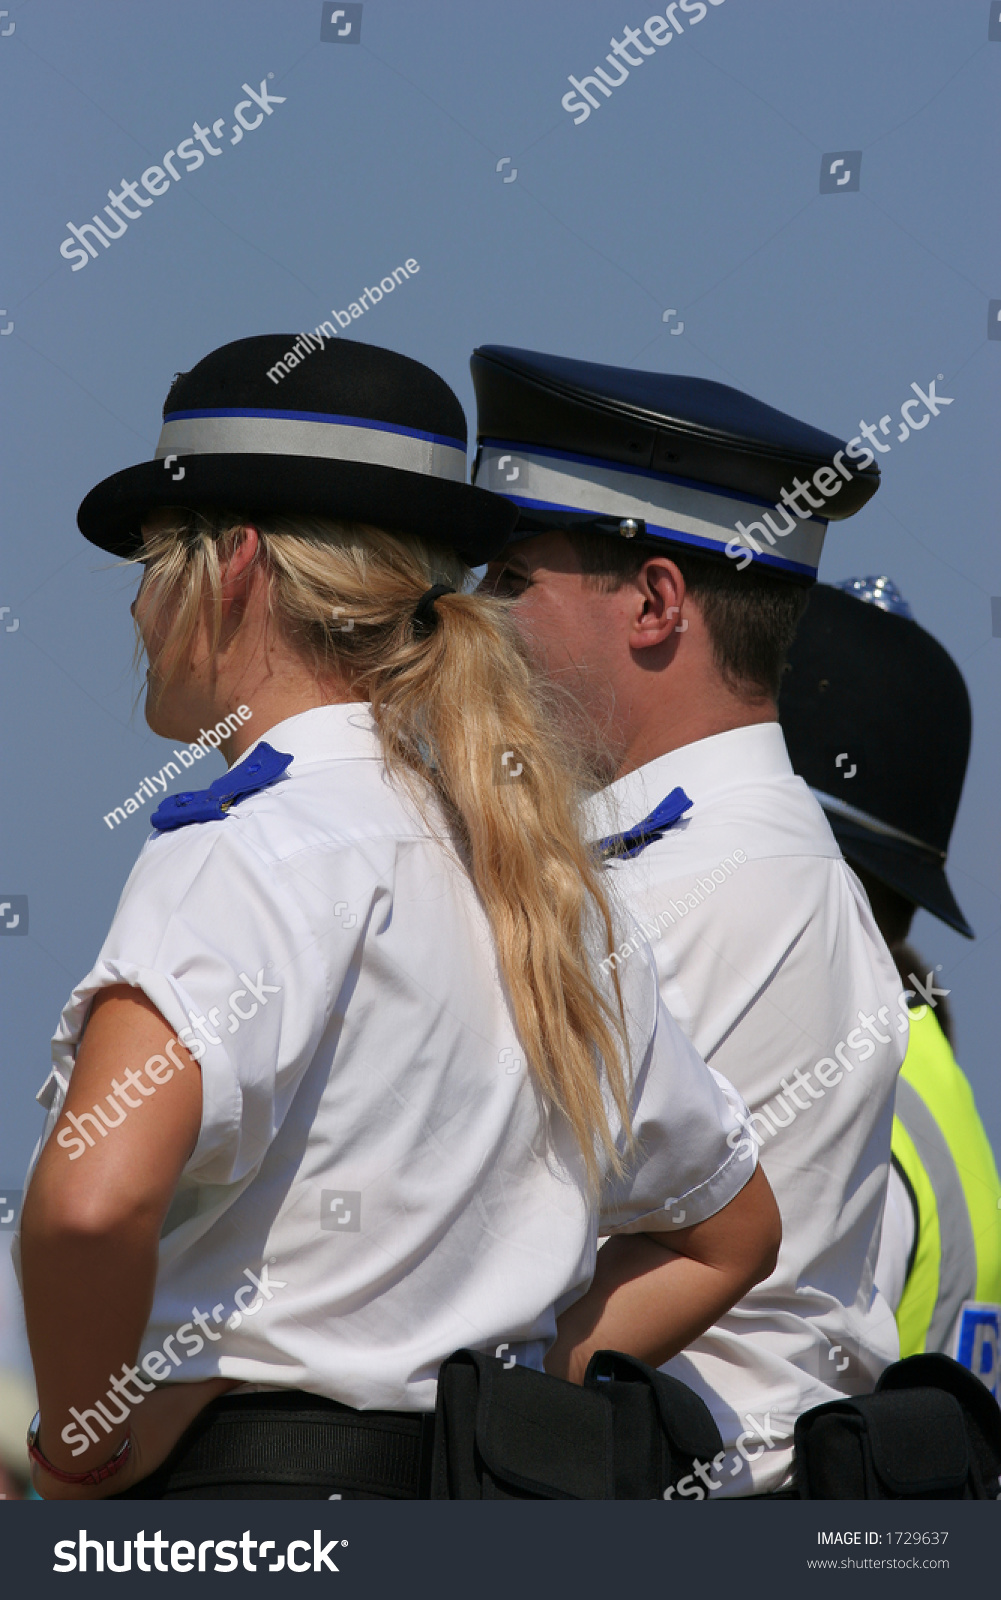 British Police In Uniform With A Blonde Female